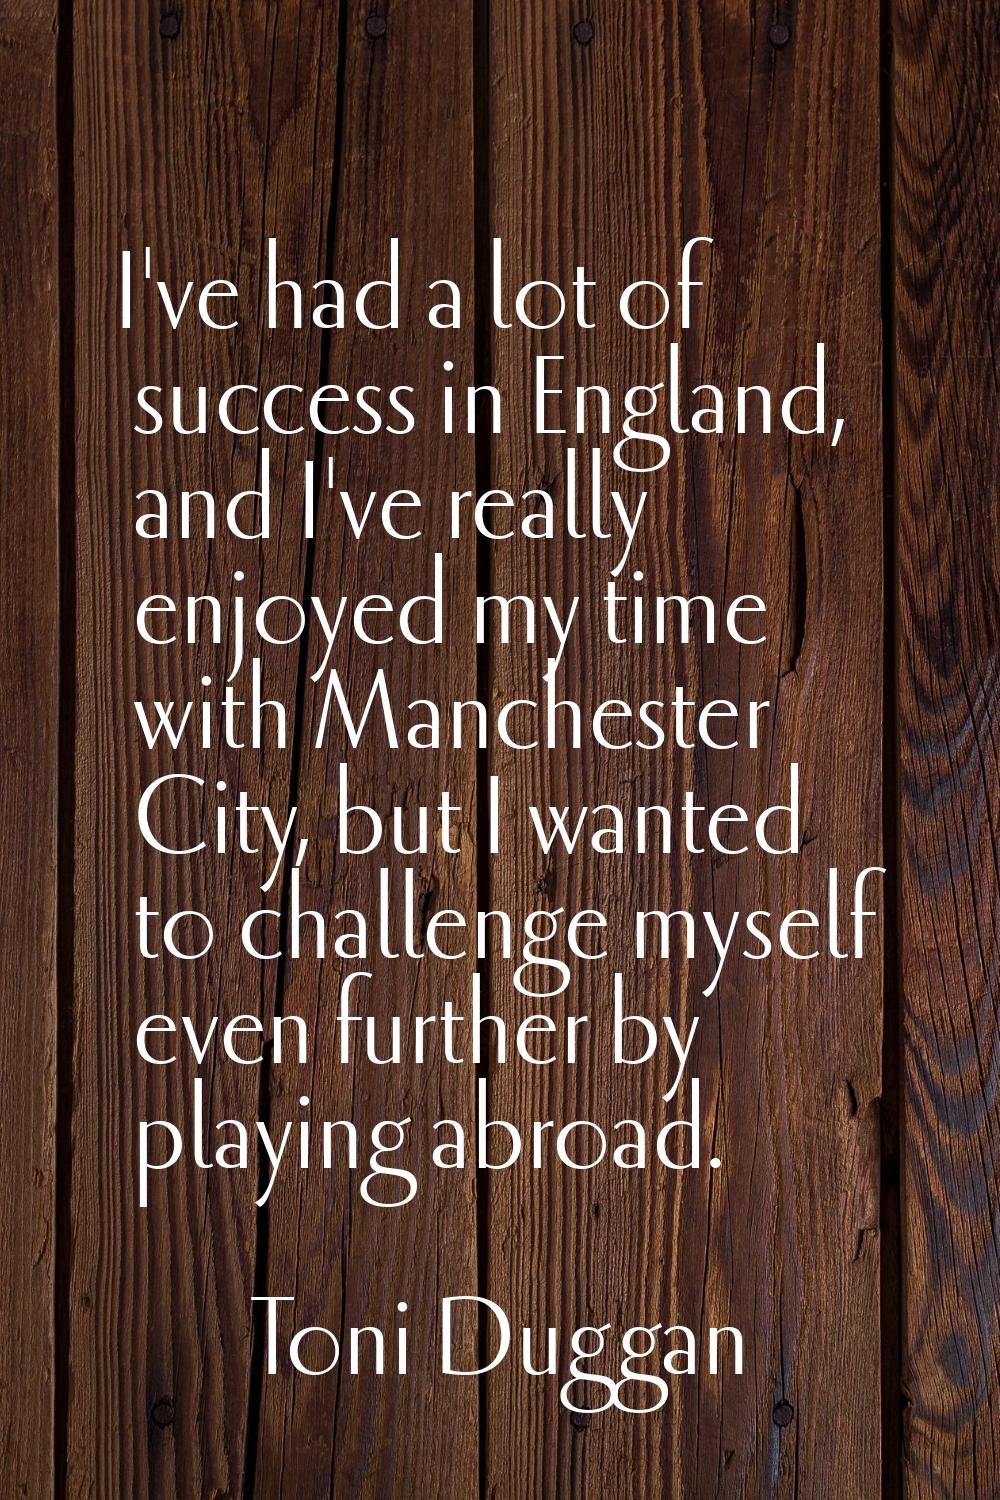 I've had a lot of success in England, and I've really enjoyed my time with Manchester City, but I w